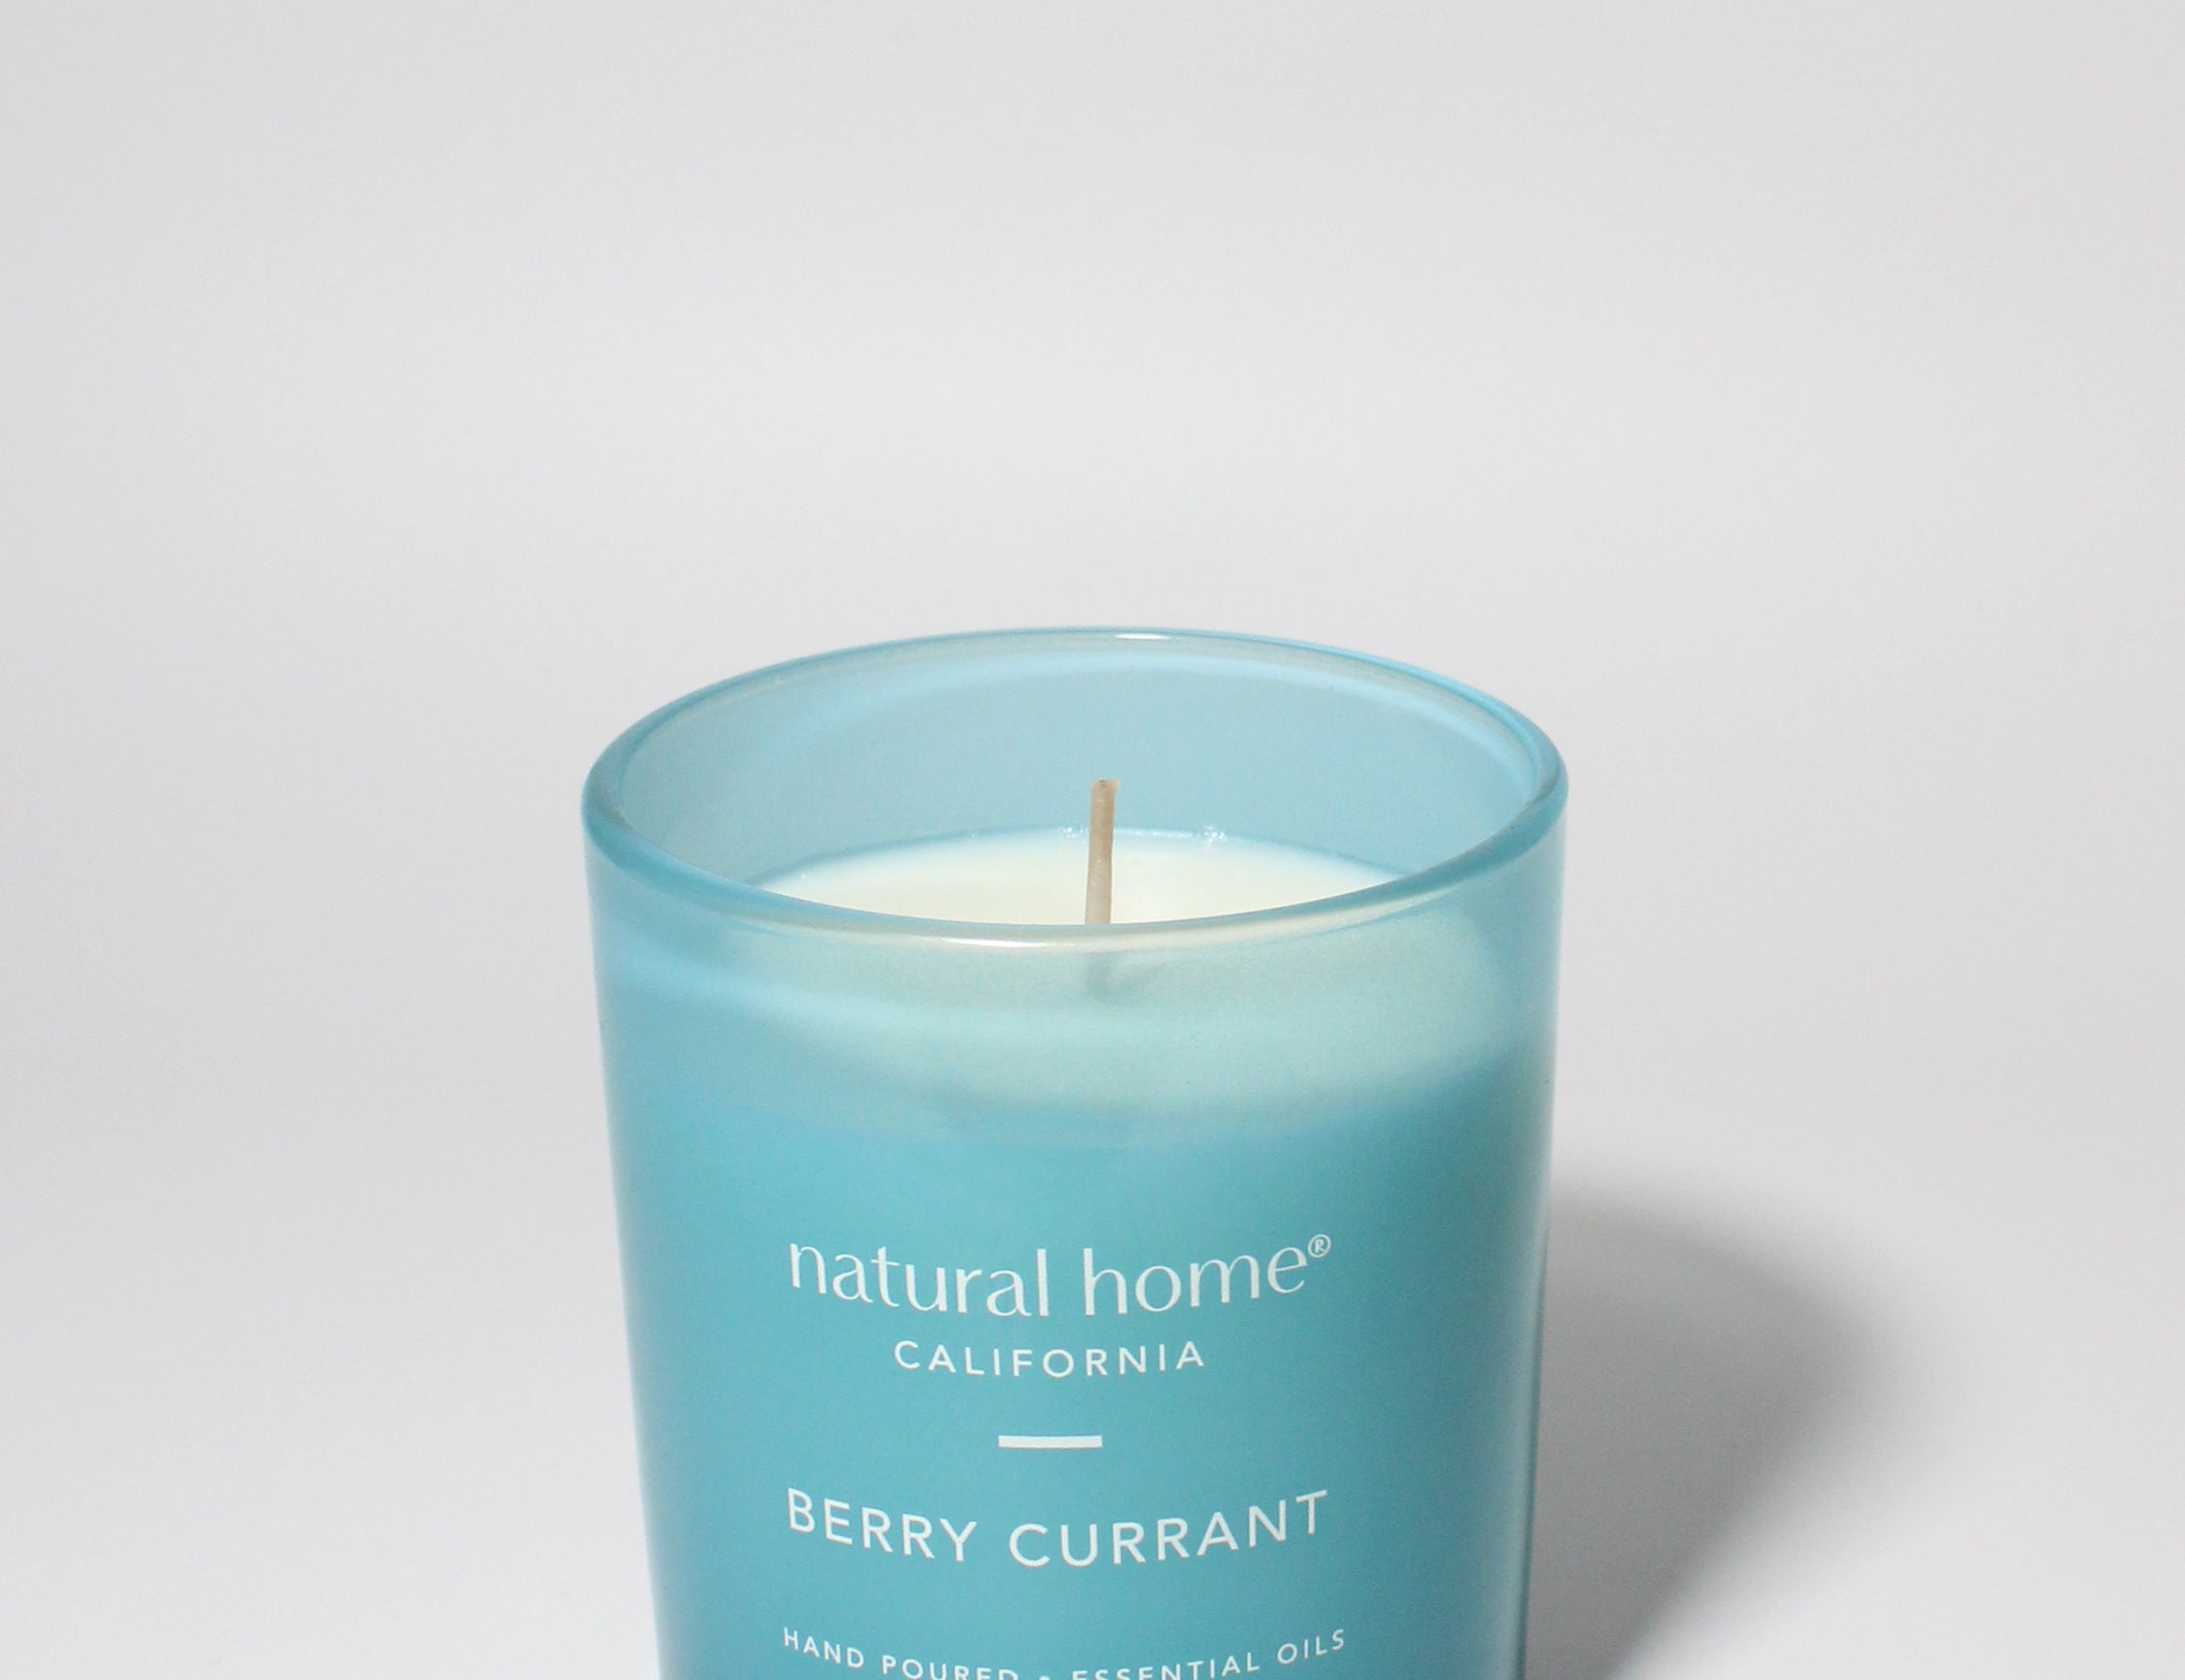 Berry Currant Natural Home 11.5 oz scented candle Aqua vessel with solid metal lid